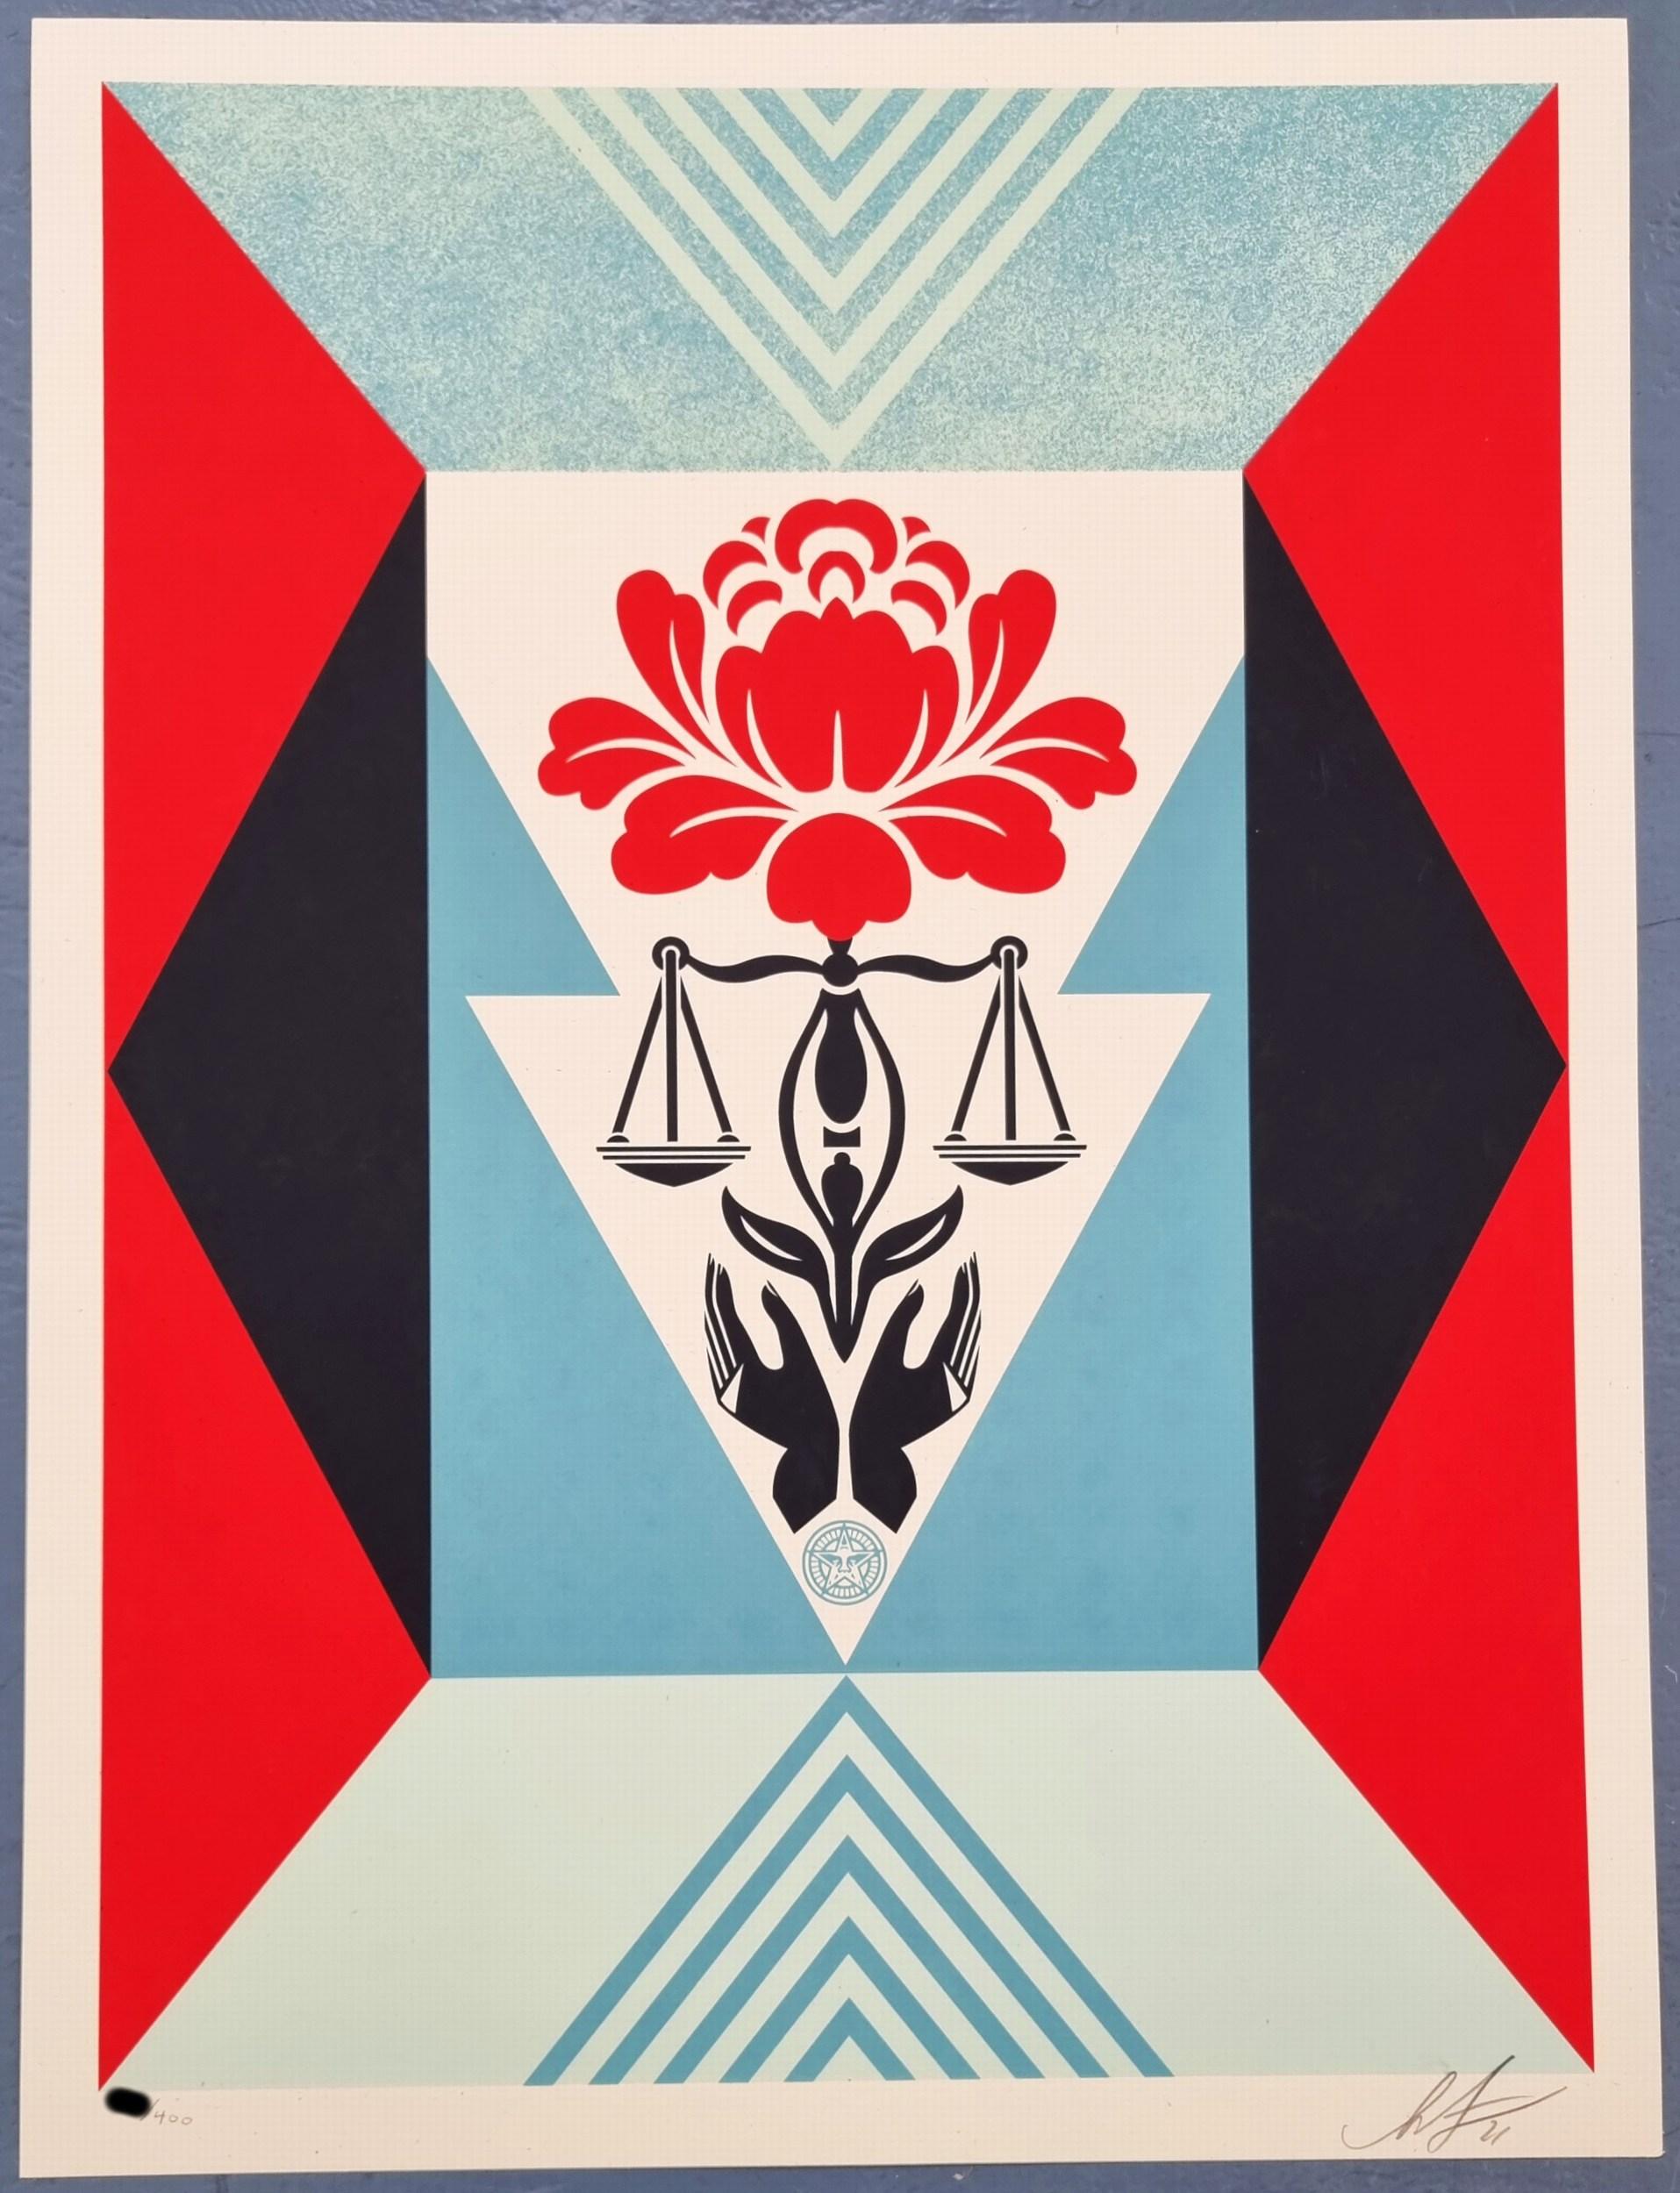 Cultivate Justice (Blue) (Environmental, Racial, Economic, Gender Equality) - Print by Shepard Fairey